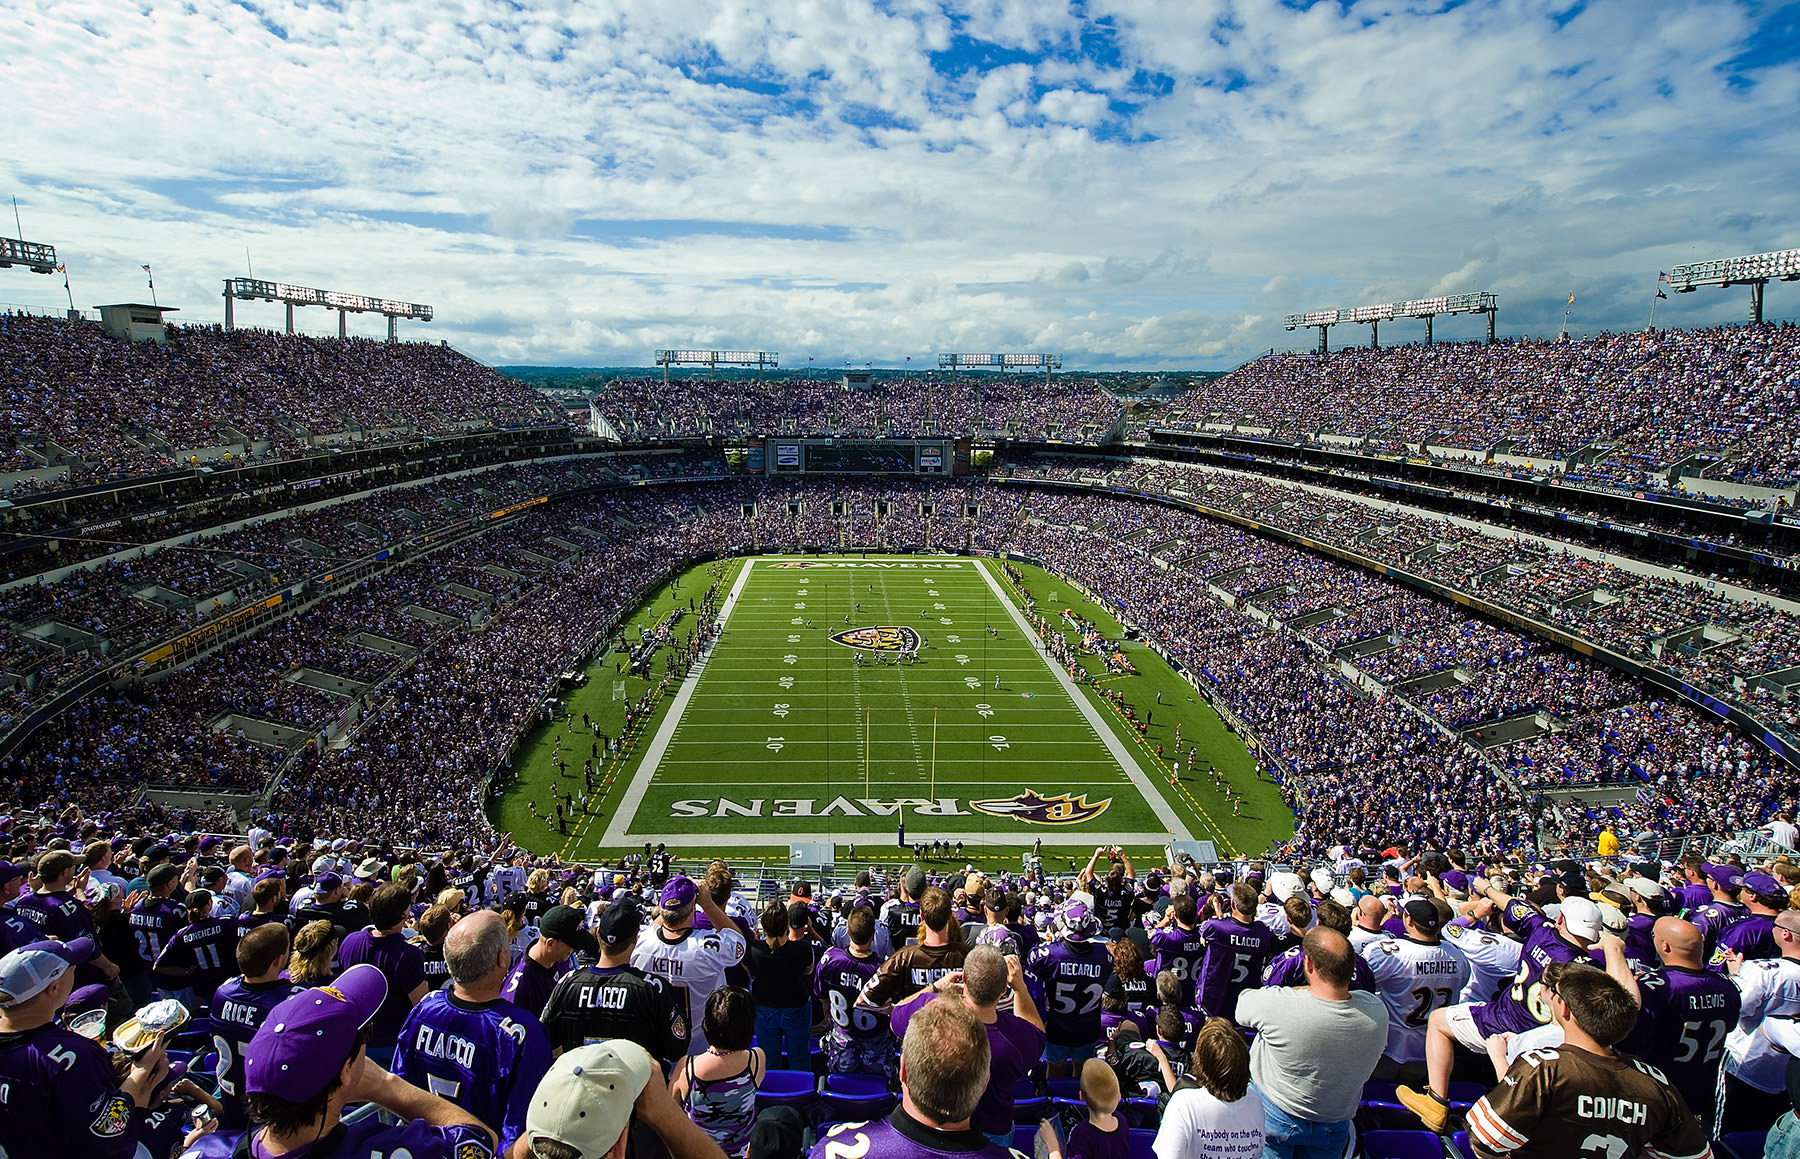 Ravens Single-Game Ticket Sales - Russell Street Report